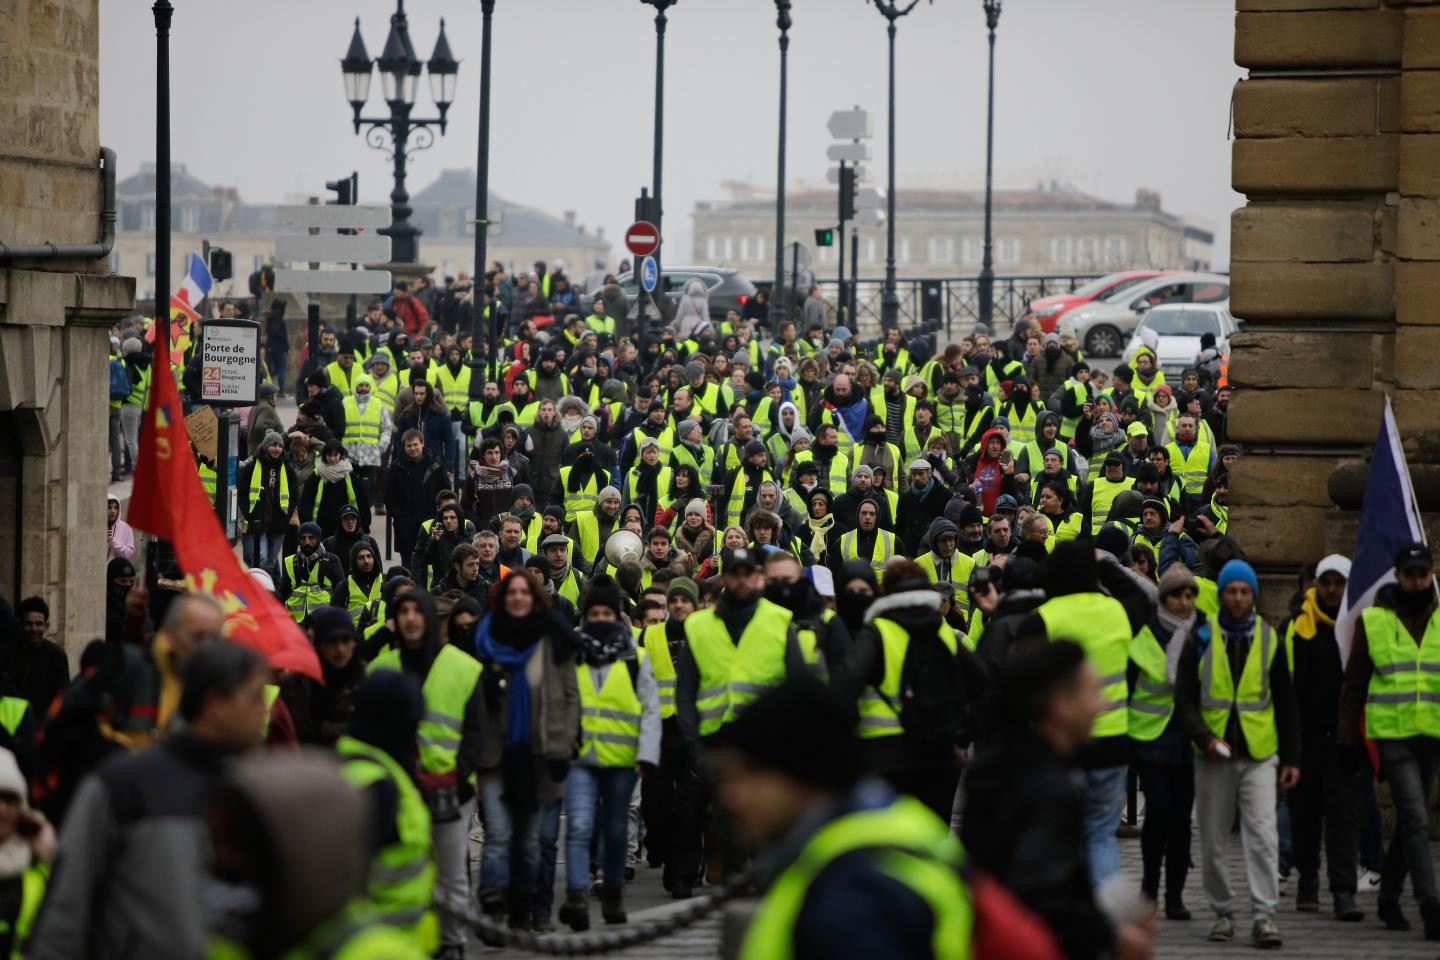 "Yellow vest protesters take part in an anti-government demonstration in Bordeaux, France, on December 29" --THIBAUD MORITZ/AFP/GETTY IMAGES